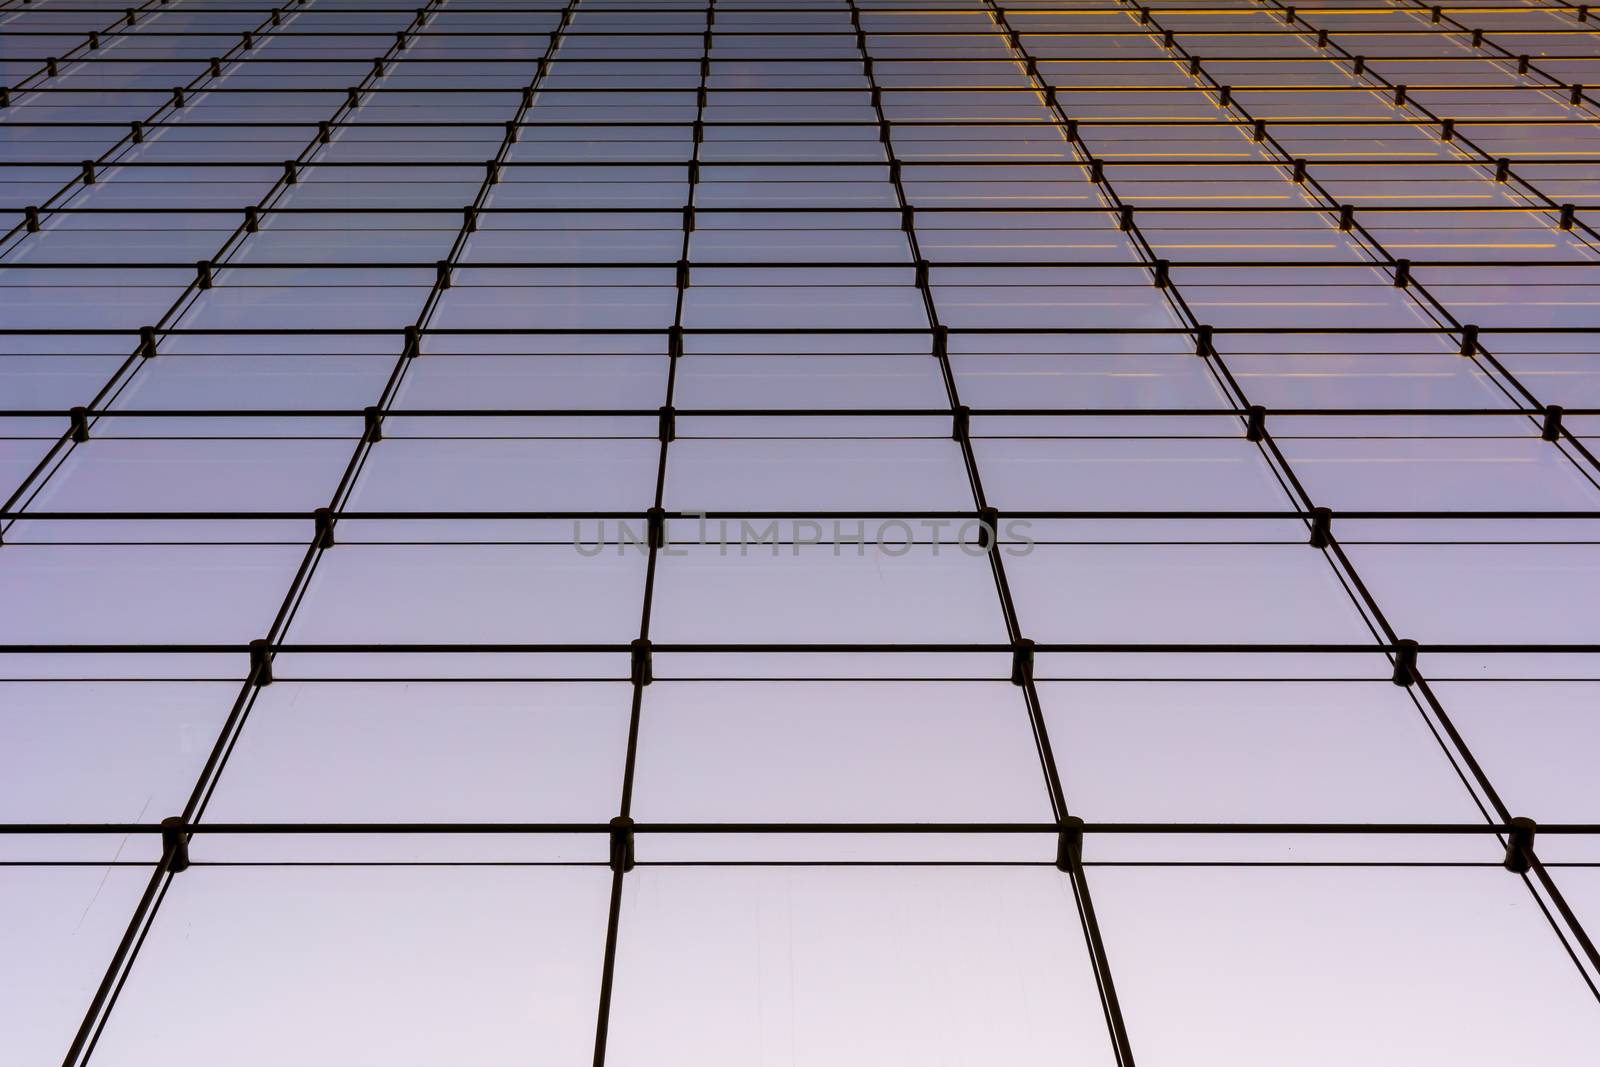 Business background, wall of glass, office building, windows framed with metal, vivid colors blue, magenta and orange